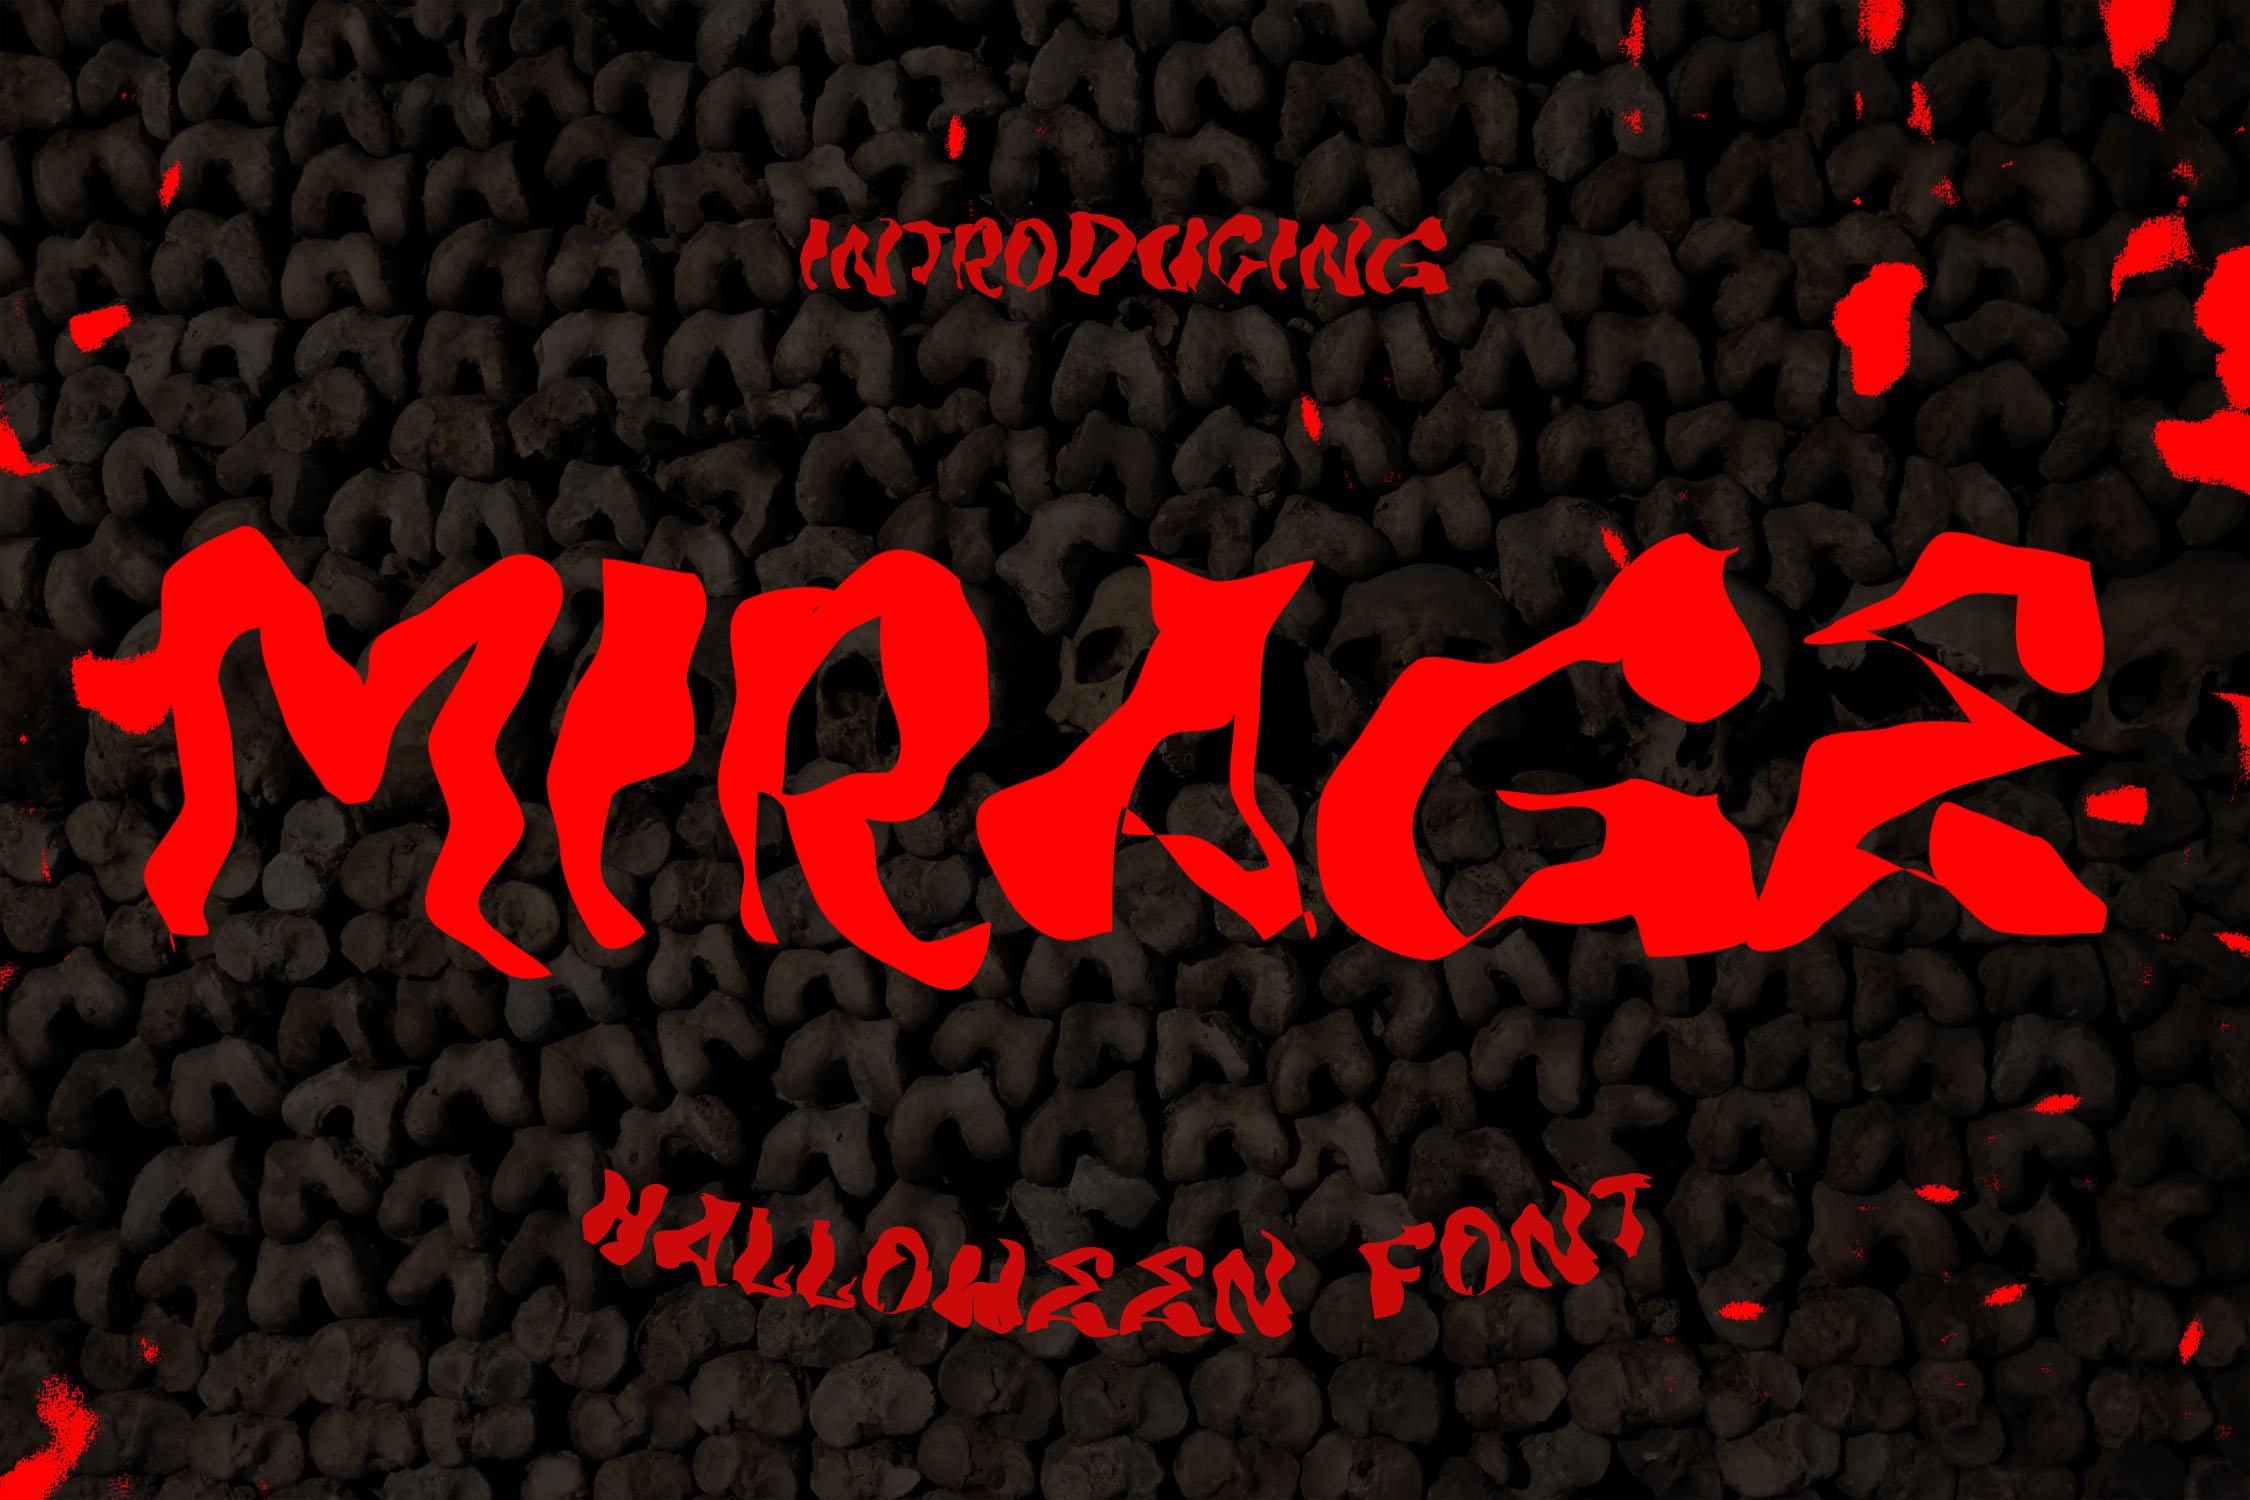 MIRAGE - Halloween Horror Font cover image.